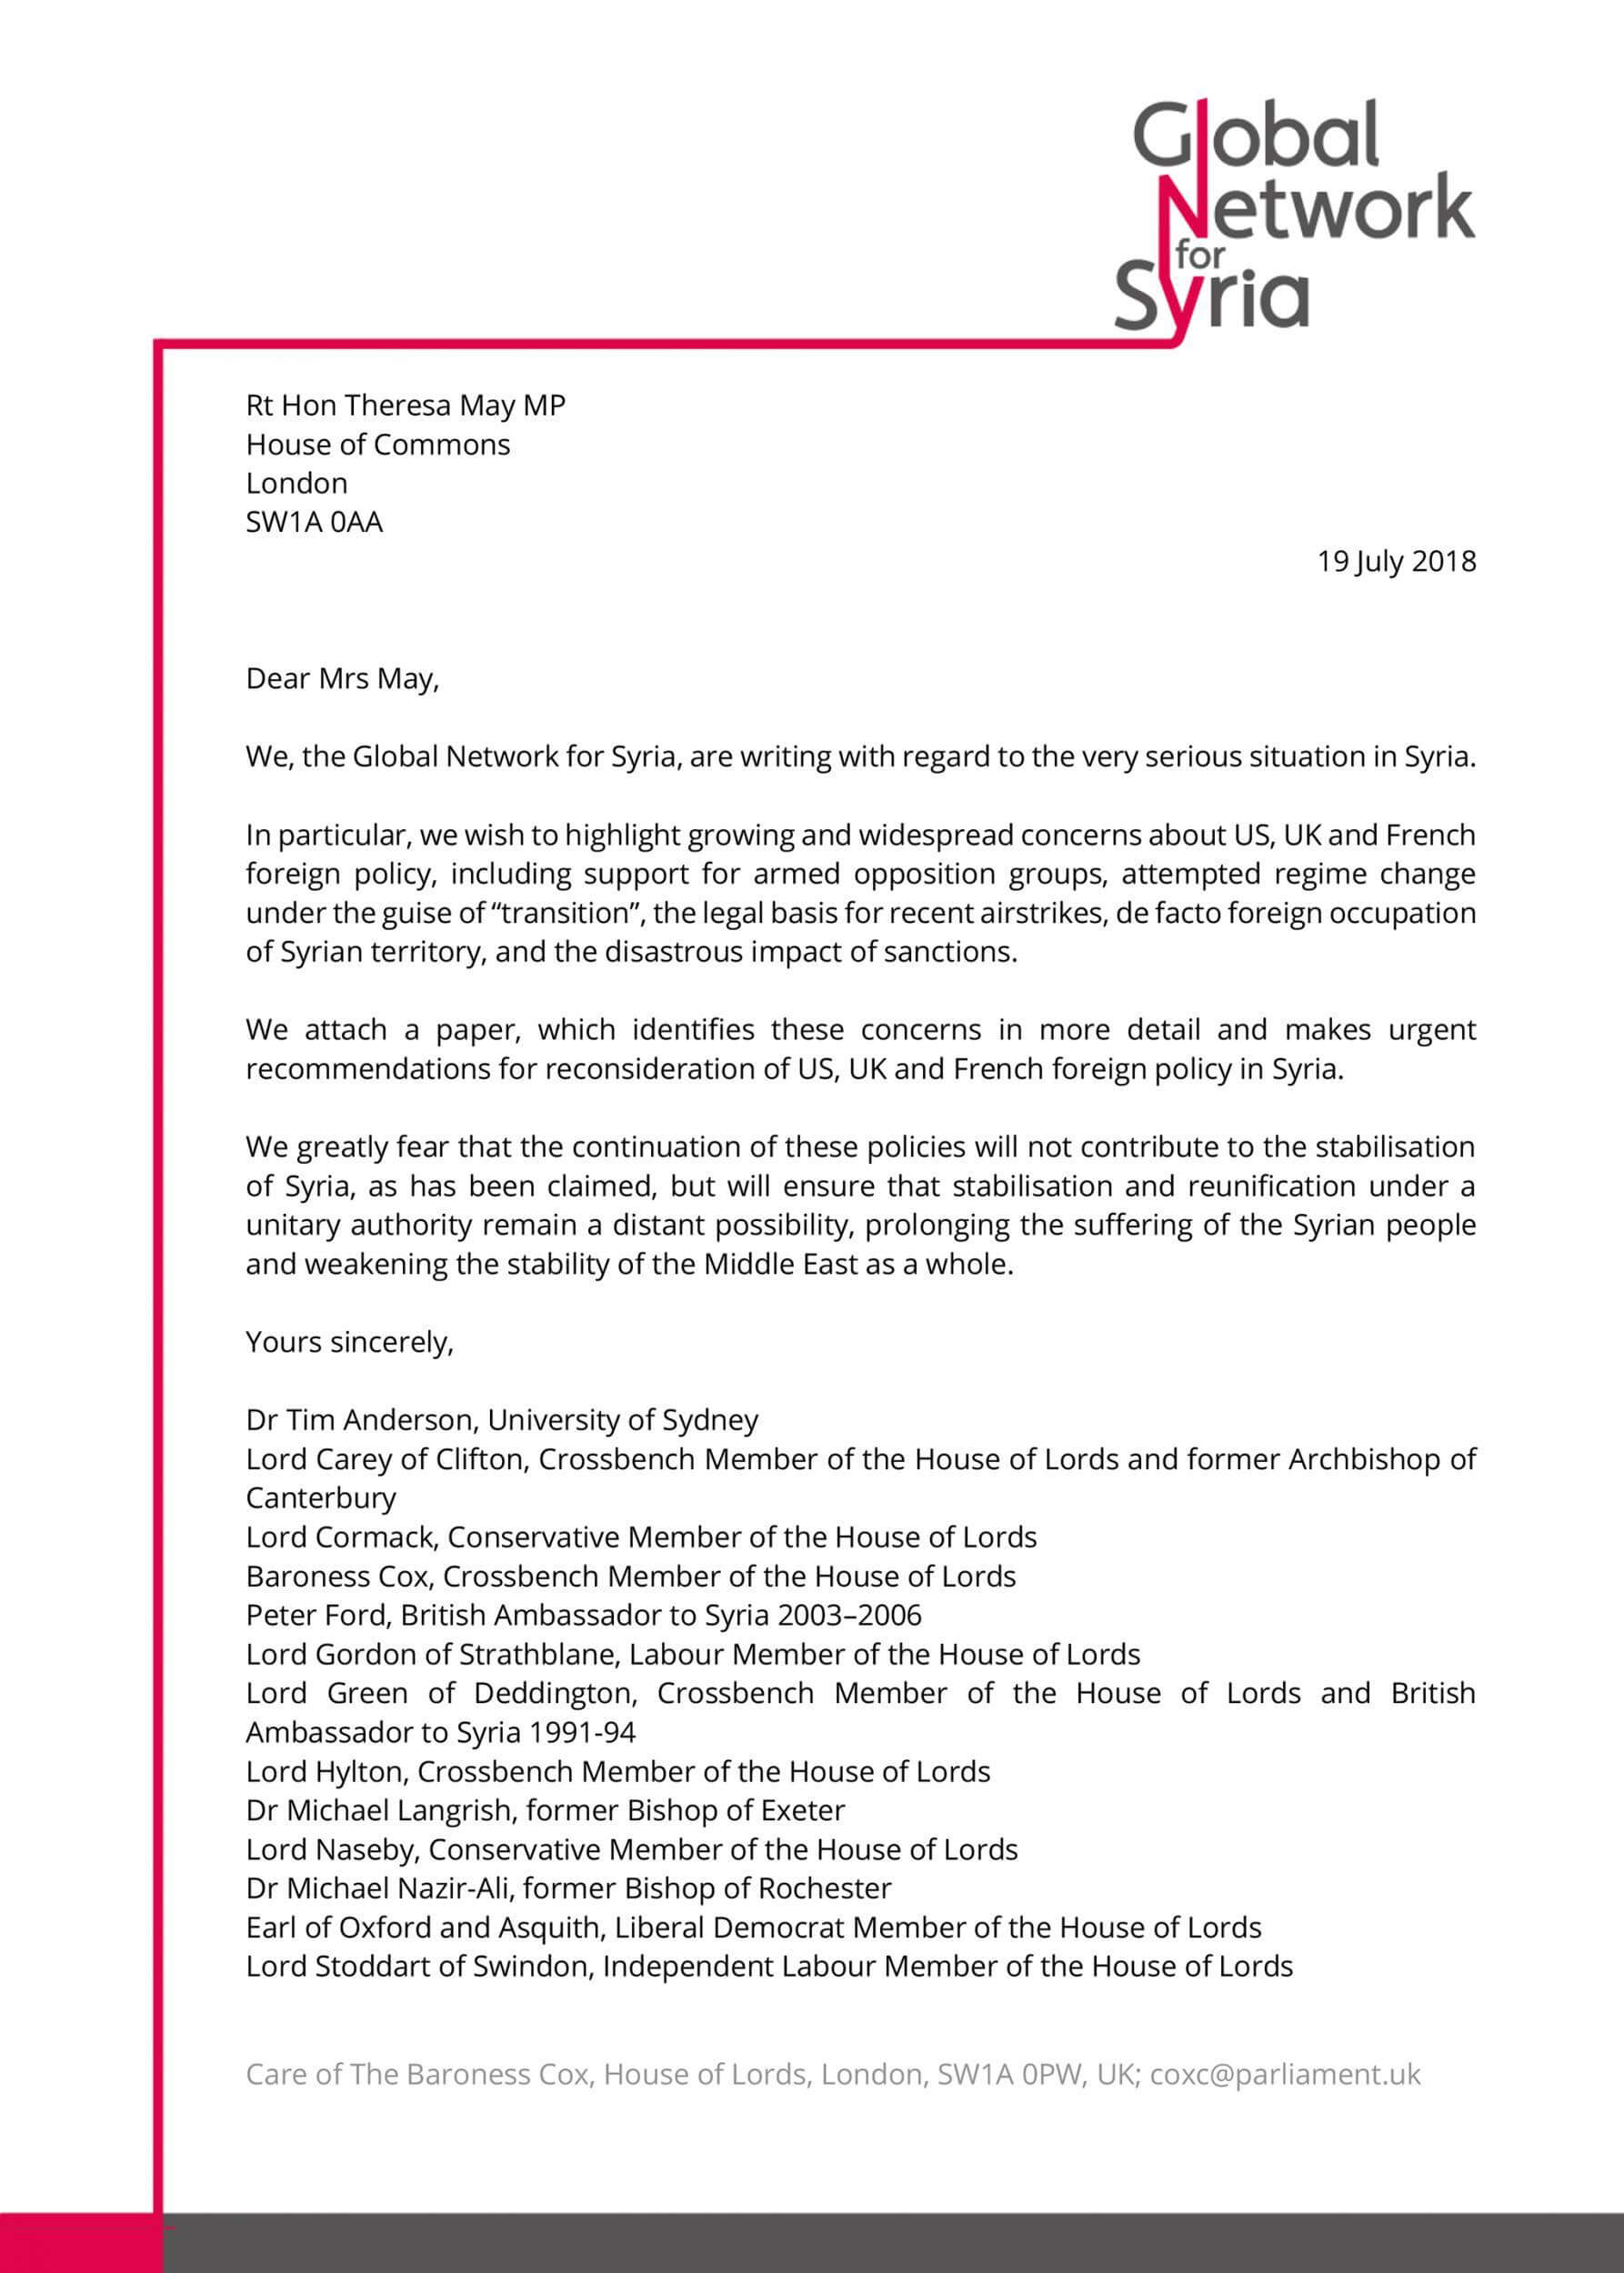 Global Network for Syria letter to UK officials.